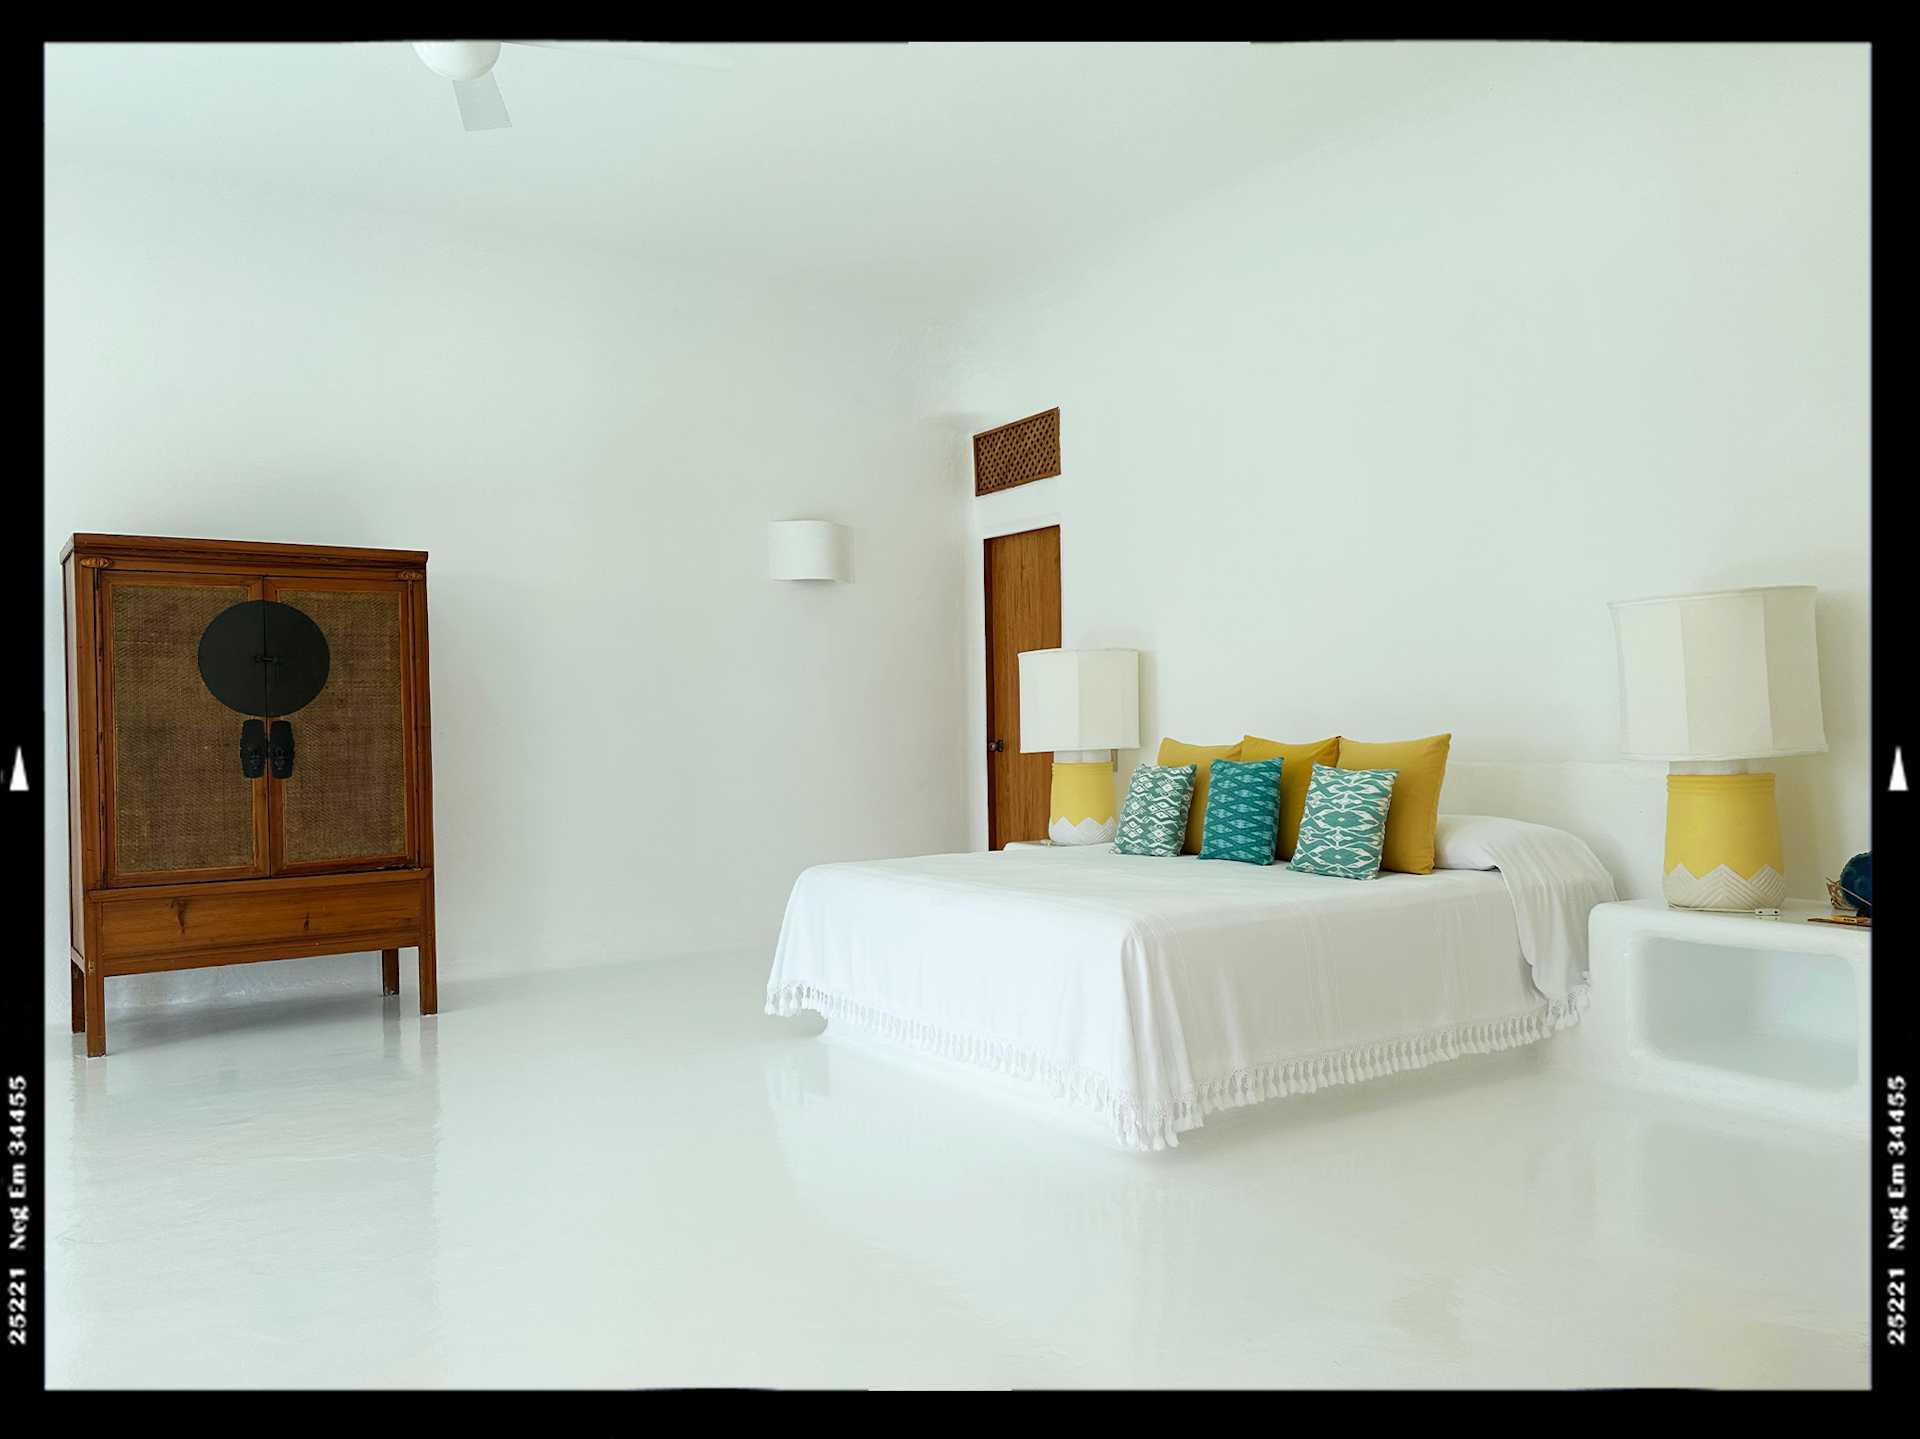 Costa Careyes whitewashed room interior 2.png